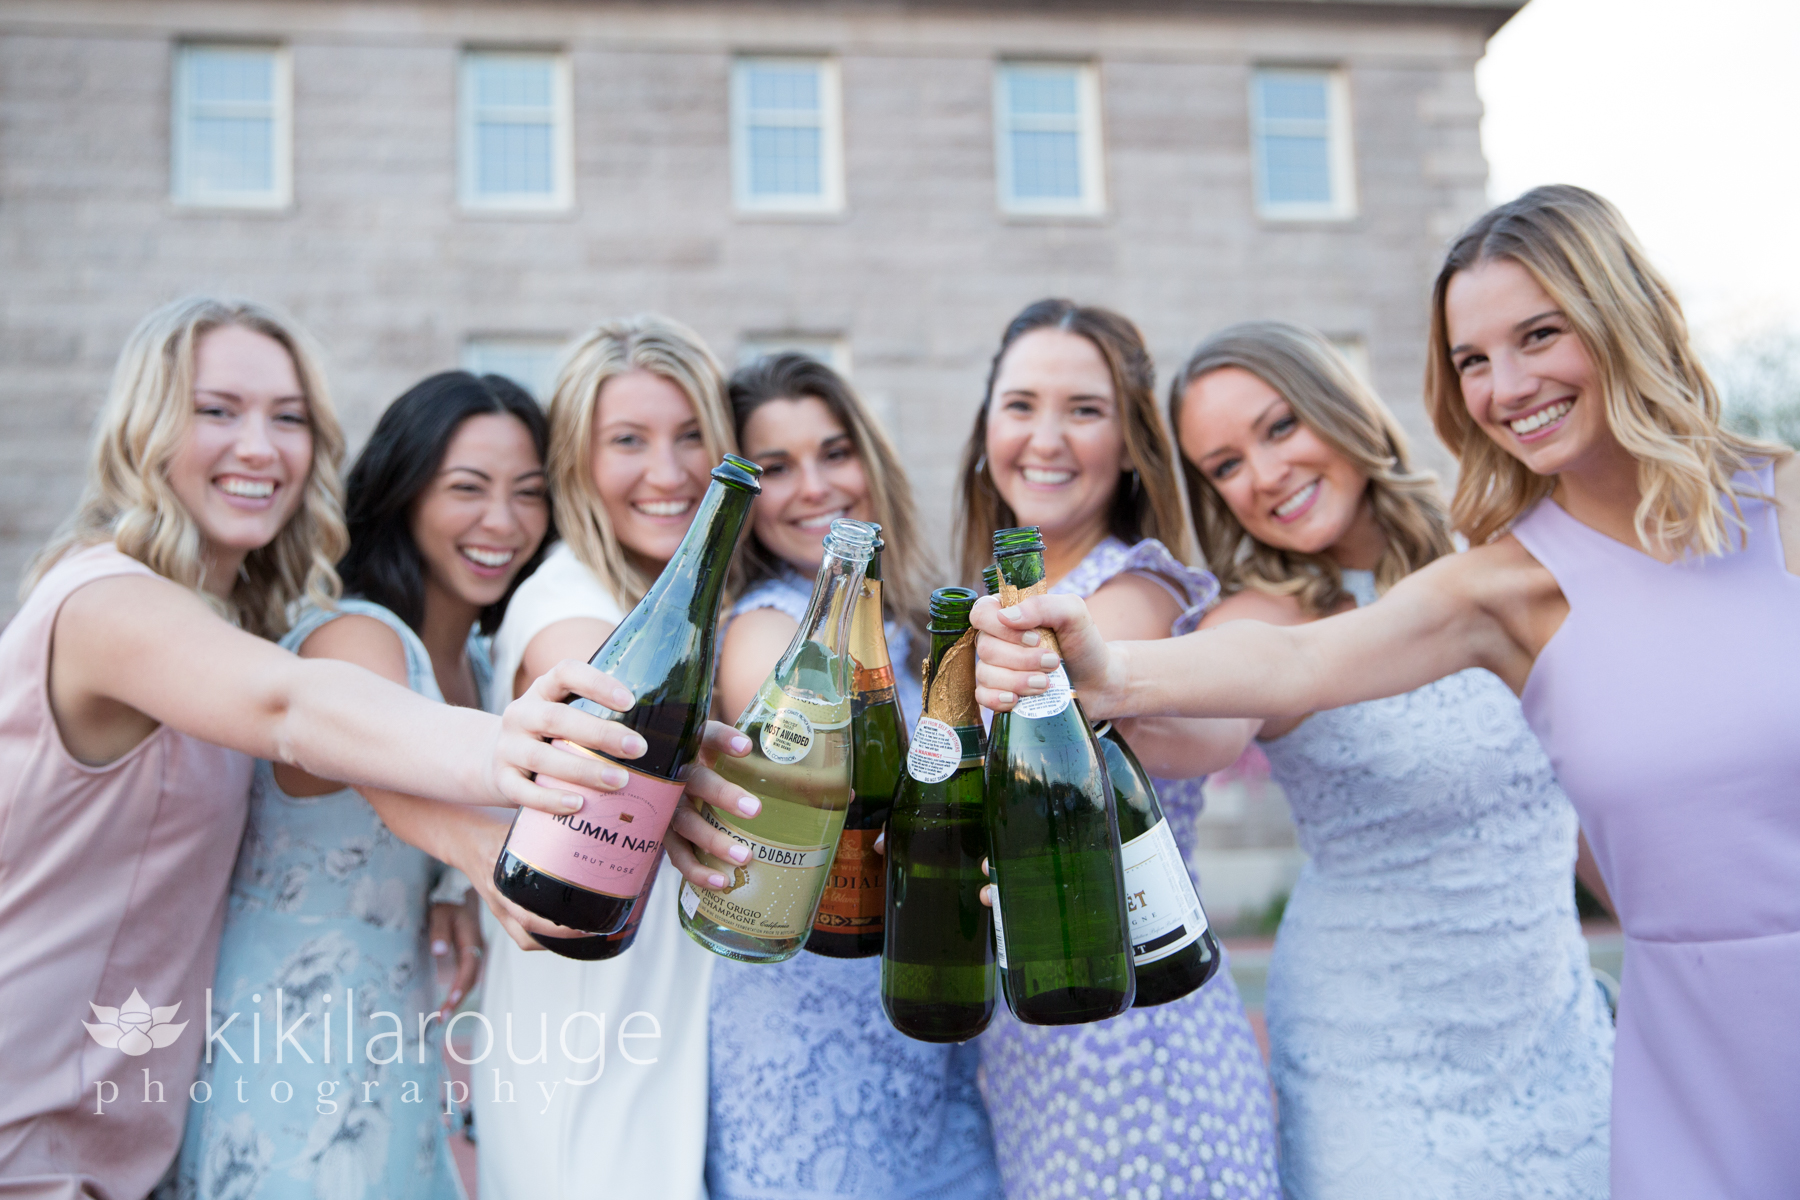 Girls all with champagne bottles toasting